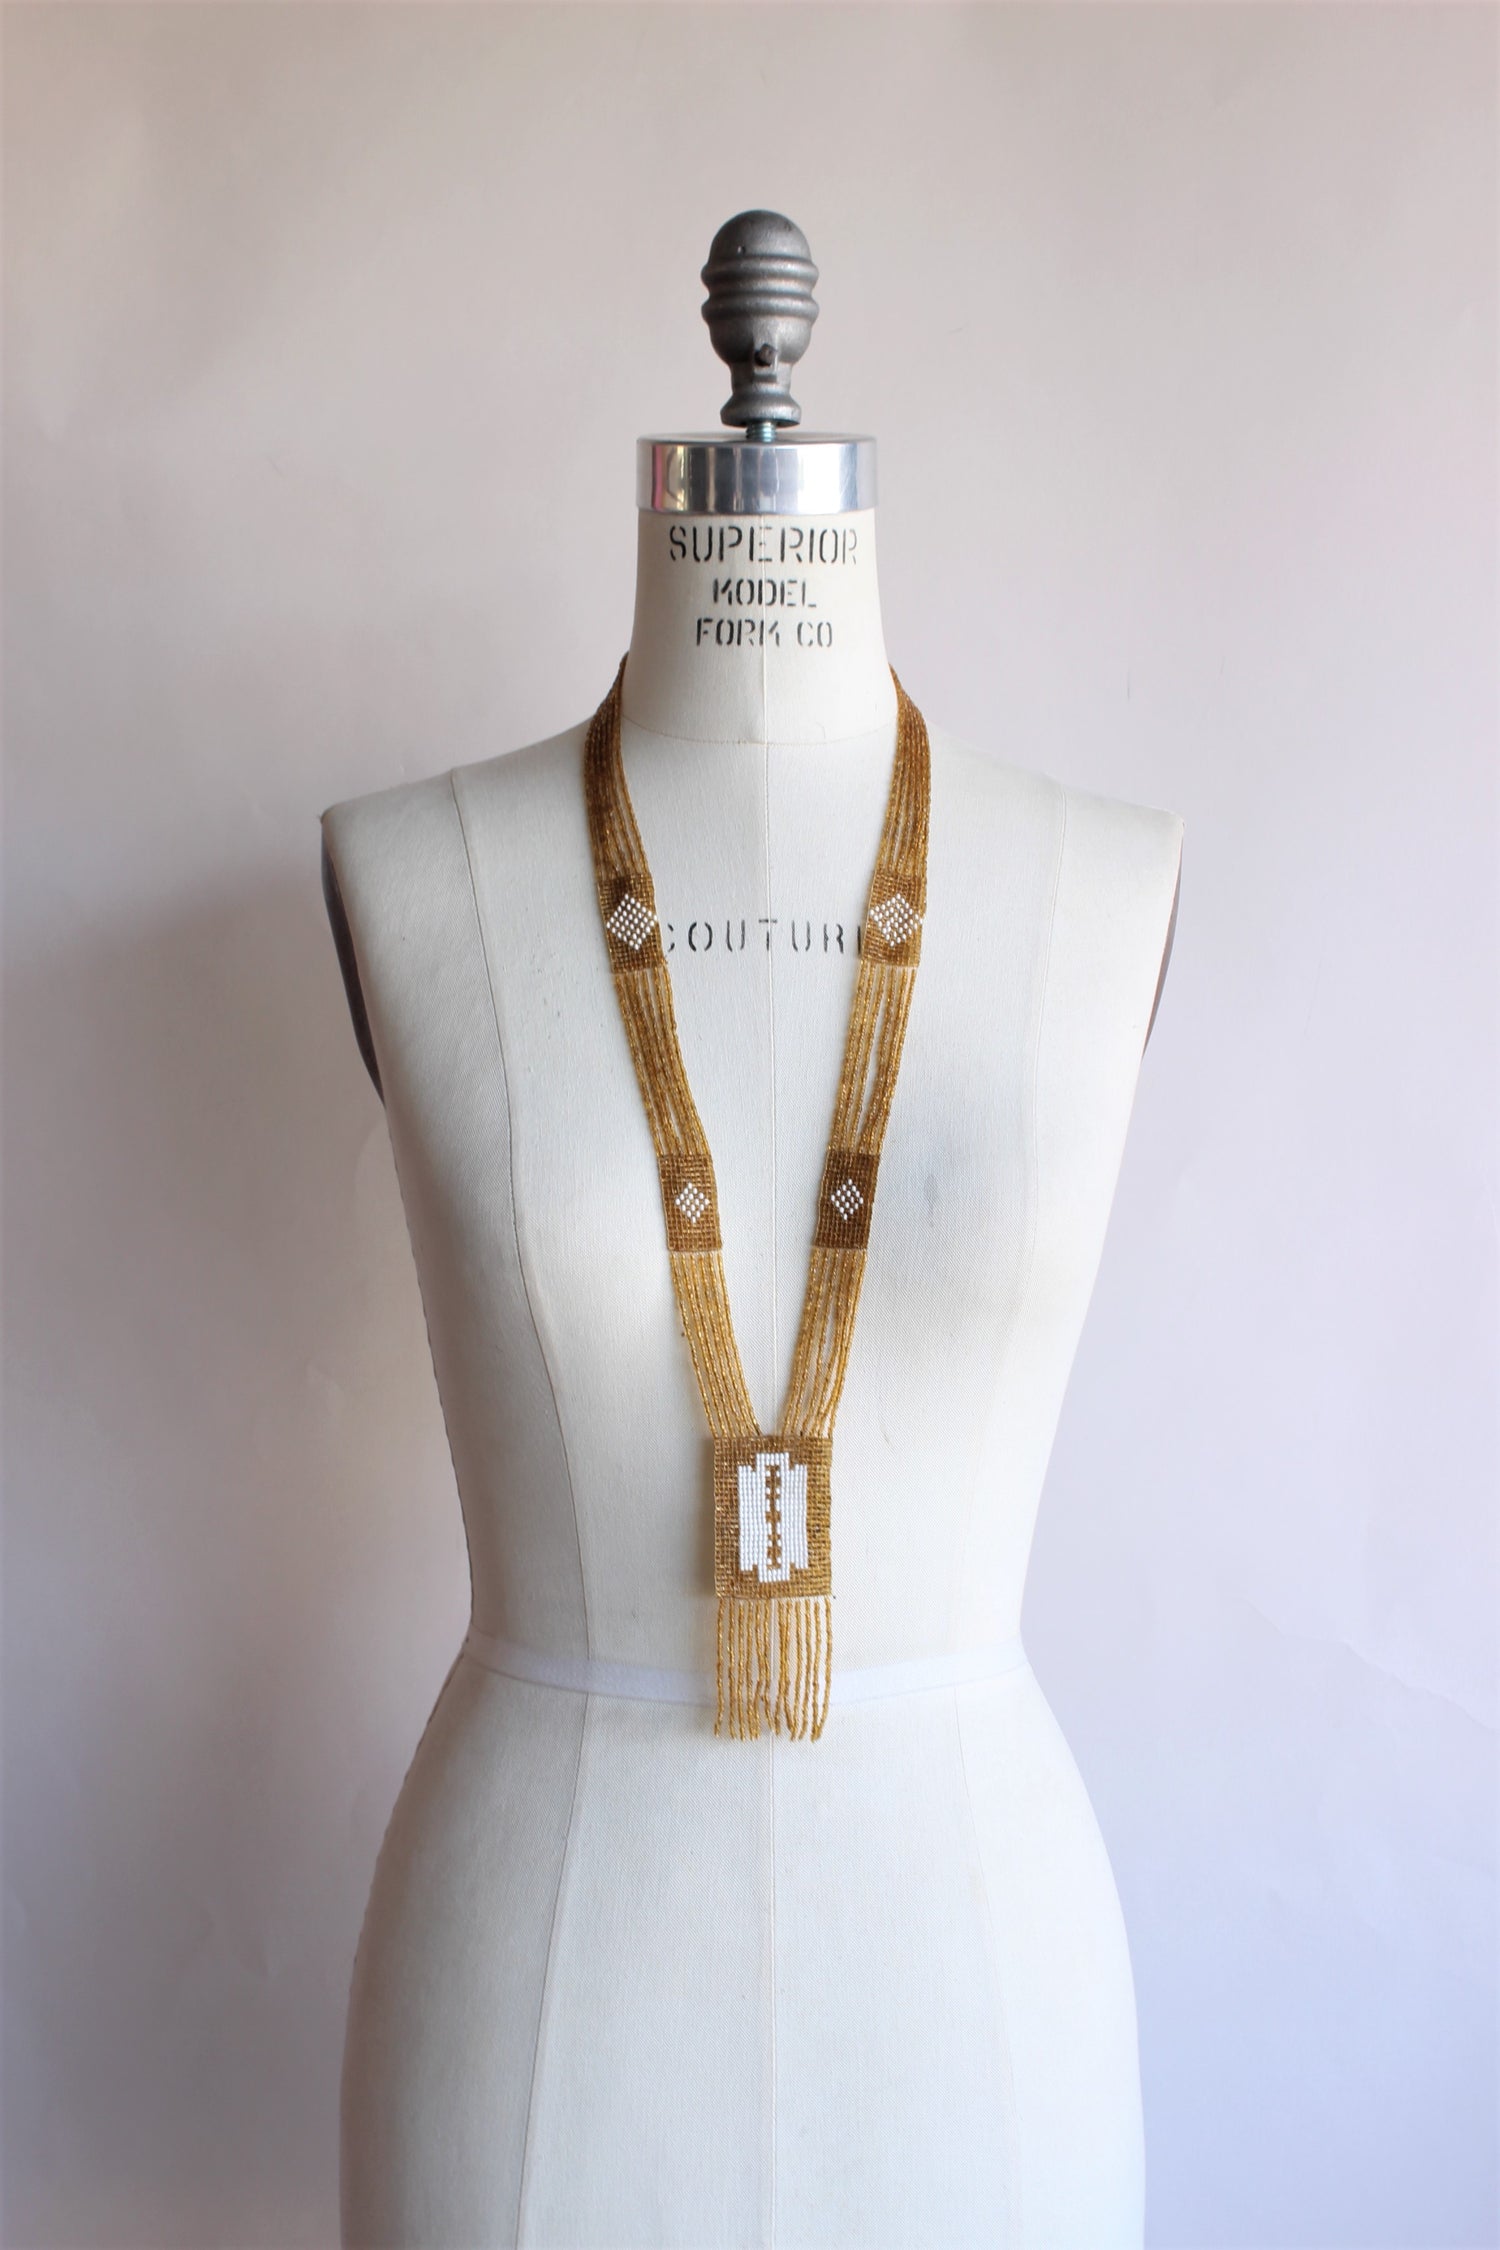 Vintage 1920s Style Gold Seed Bead Necklace